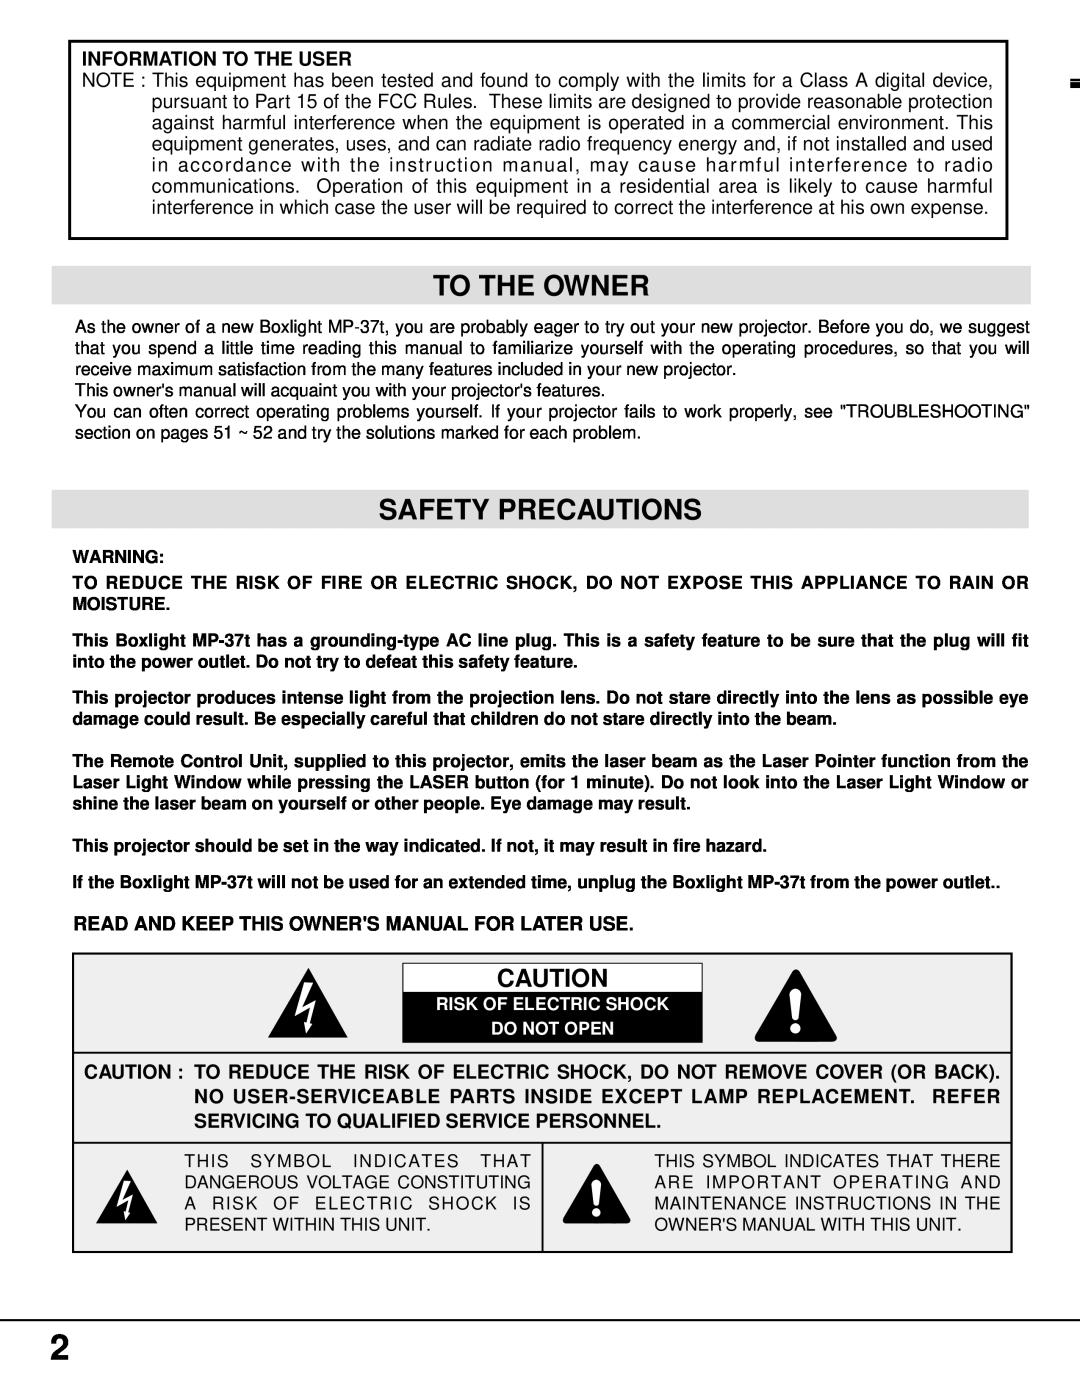 BOXLIGHT MP-37t To The Owner, Safety Precautions, Information To The User, Read And Keep This Owners Manual For Later Use 